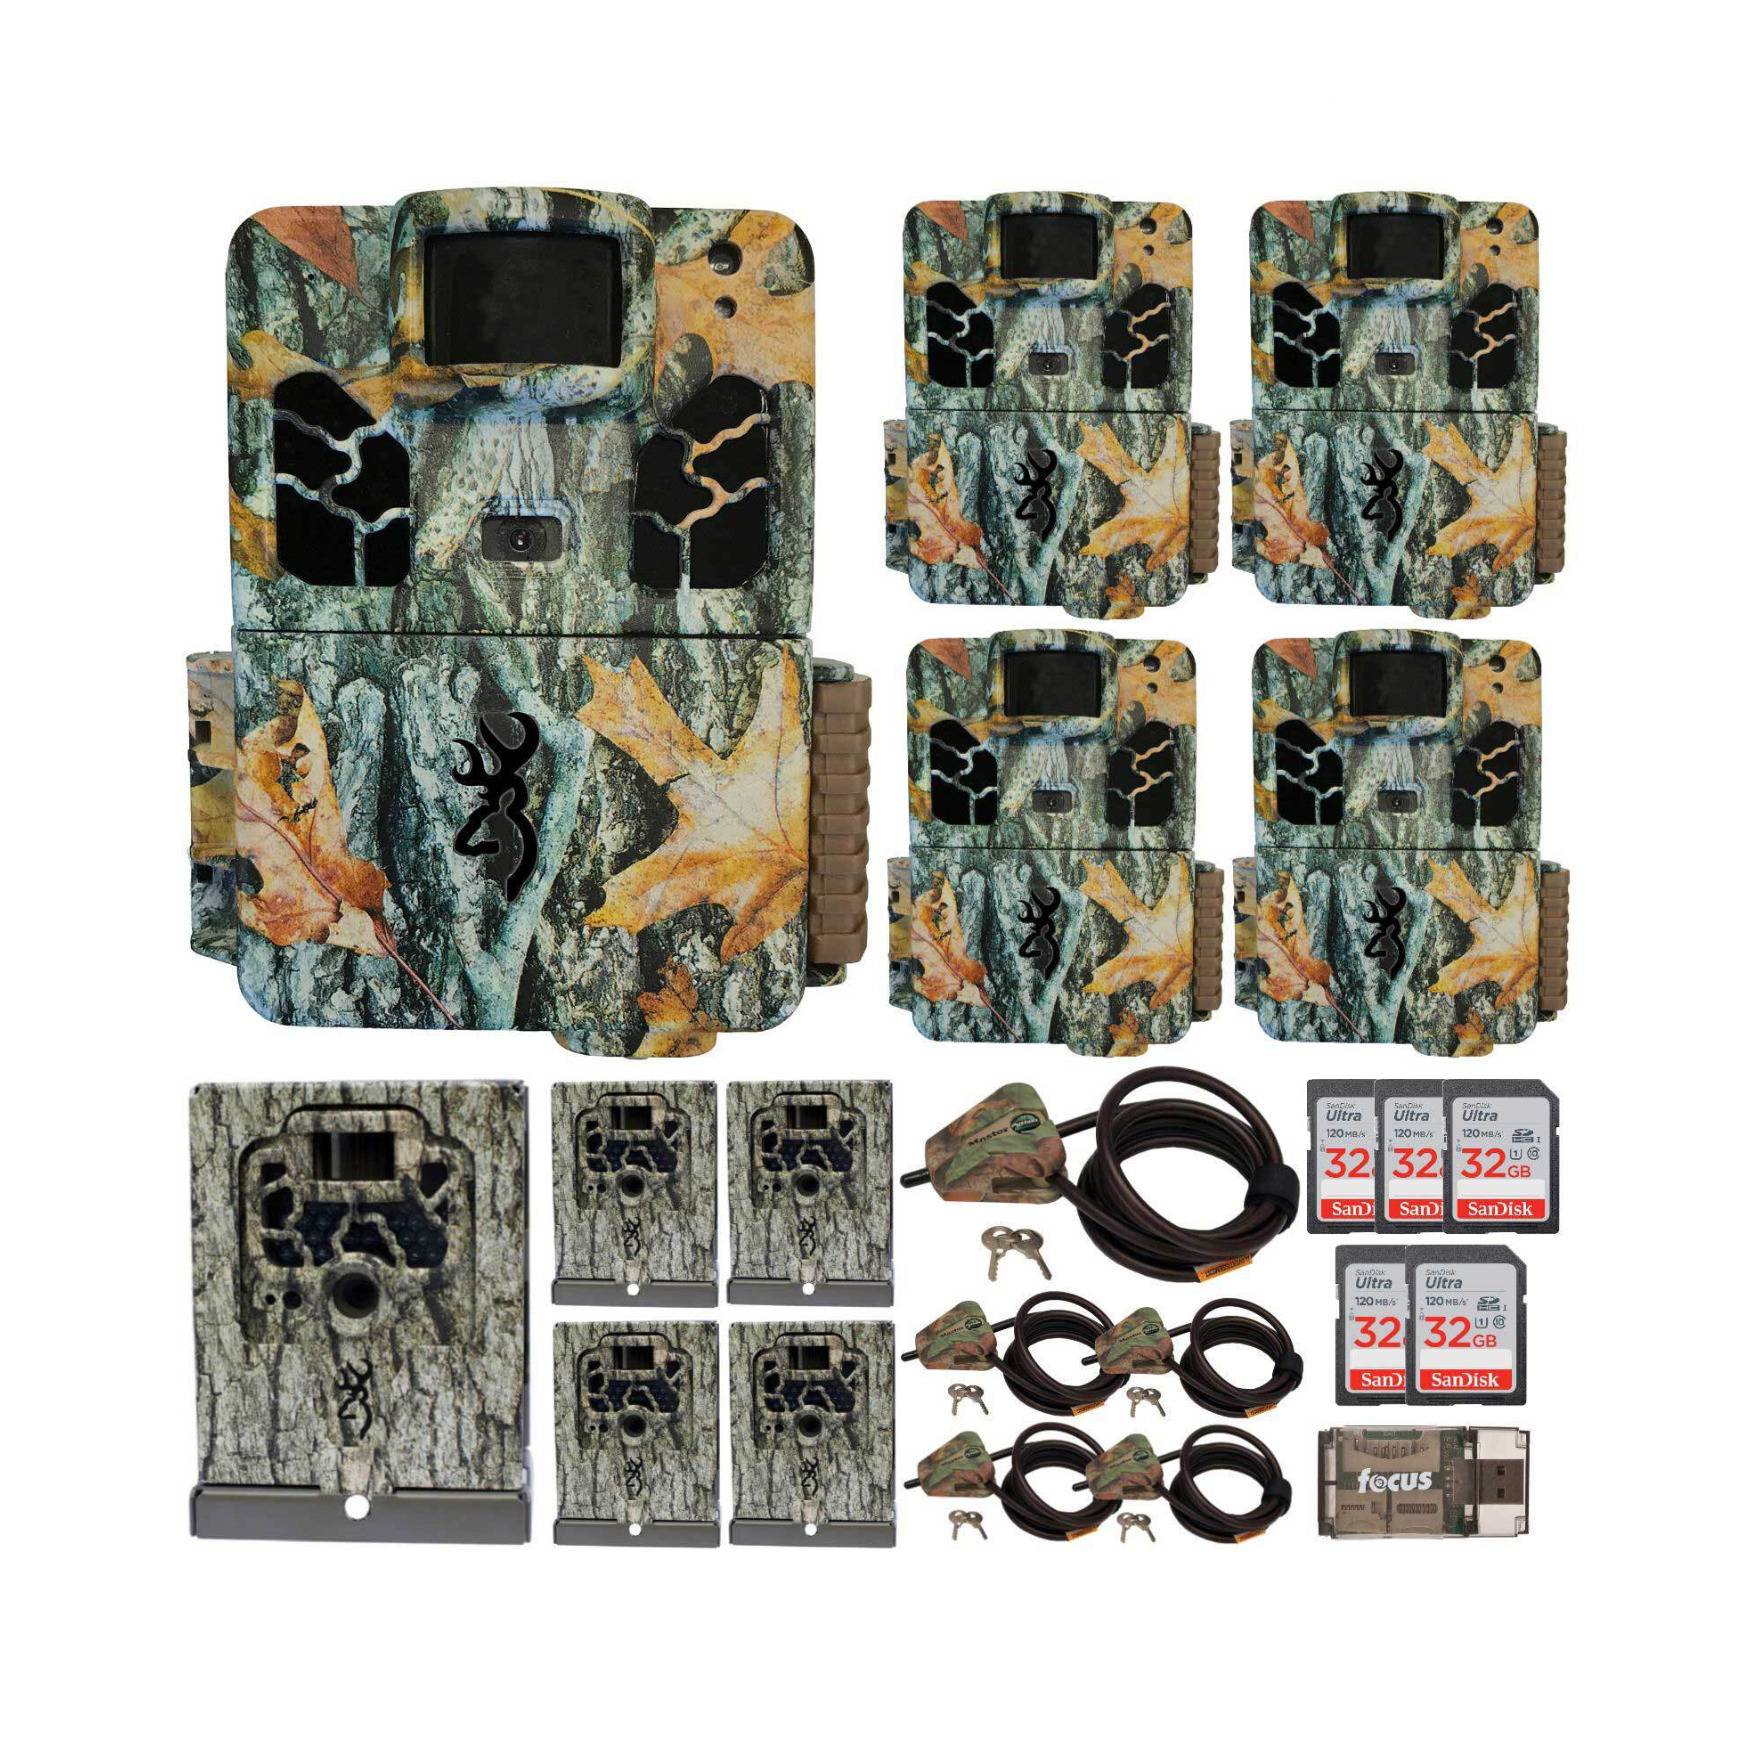 Browning Trail Cameras Dark Ops HD Pro X 20MP Trail Camera Security Bundle (5-Pack)